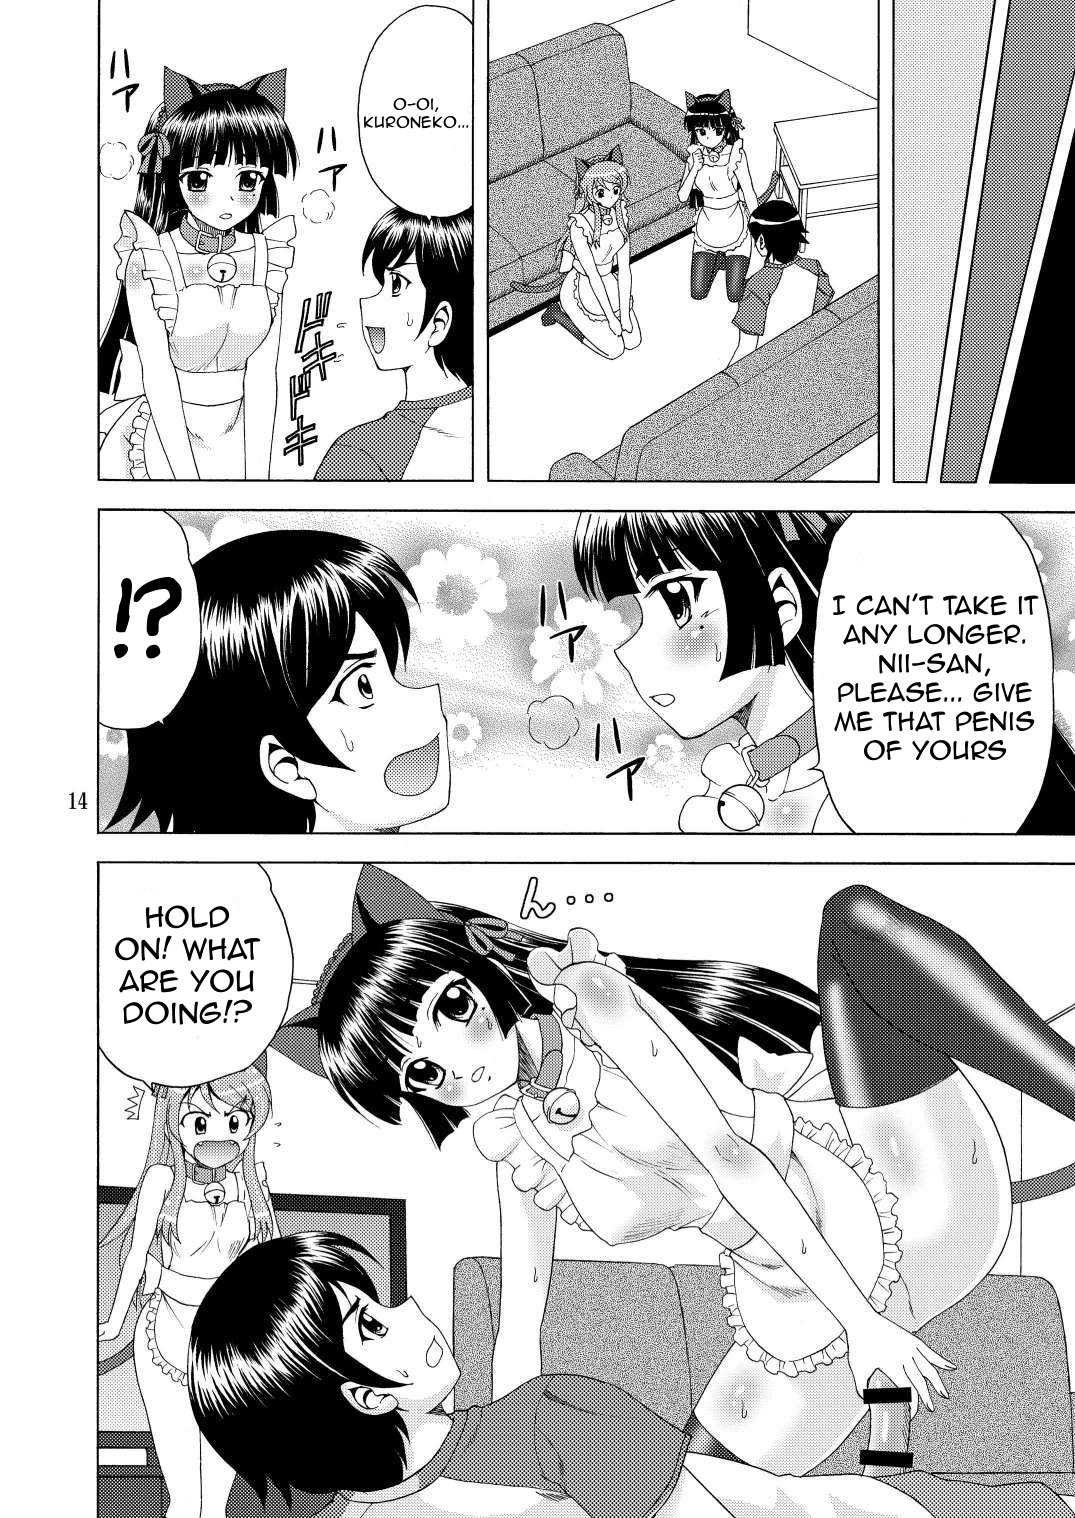 [Yasurin-do] My Little Sister can&#039;t be in Naked Apron and Nekomimi (OreImo) (English) =Team Vanilla= 